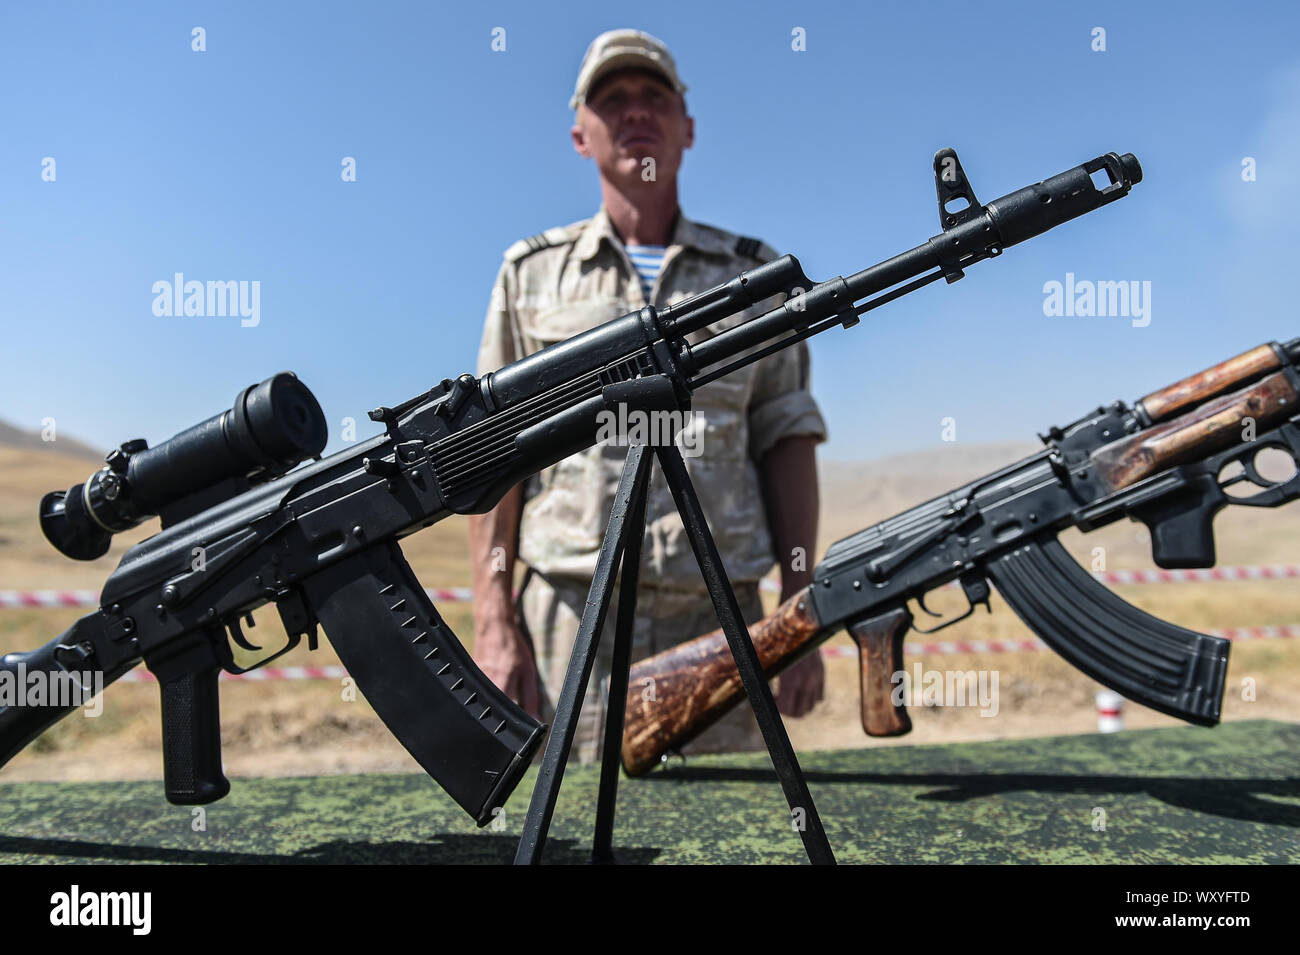 (190918) -- DUSHANBE, Sept. 18, 2019 (Xinhua) -- Russian automatic rifles AKM (L) and AK-74 are seen during the Center-2019 military exercise in Dushanbe region, Tajikistan, on Sept. 18, 2019. Tsentr-2019 (Center-2019) military exercises involving eight countries began on Monday in Russia, Kazakhstan and Tajikistan, the Russian Defense Ministry said in a statement on Tuesday. A total of 128,000 troops, more than 20,000 units of weapons and military hardware, about 600 aircraft and up to 15 ships and support vessels will take part in the drills on several training grounds in the three countries Stock Photo